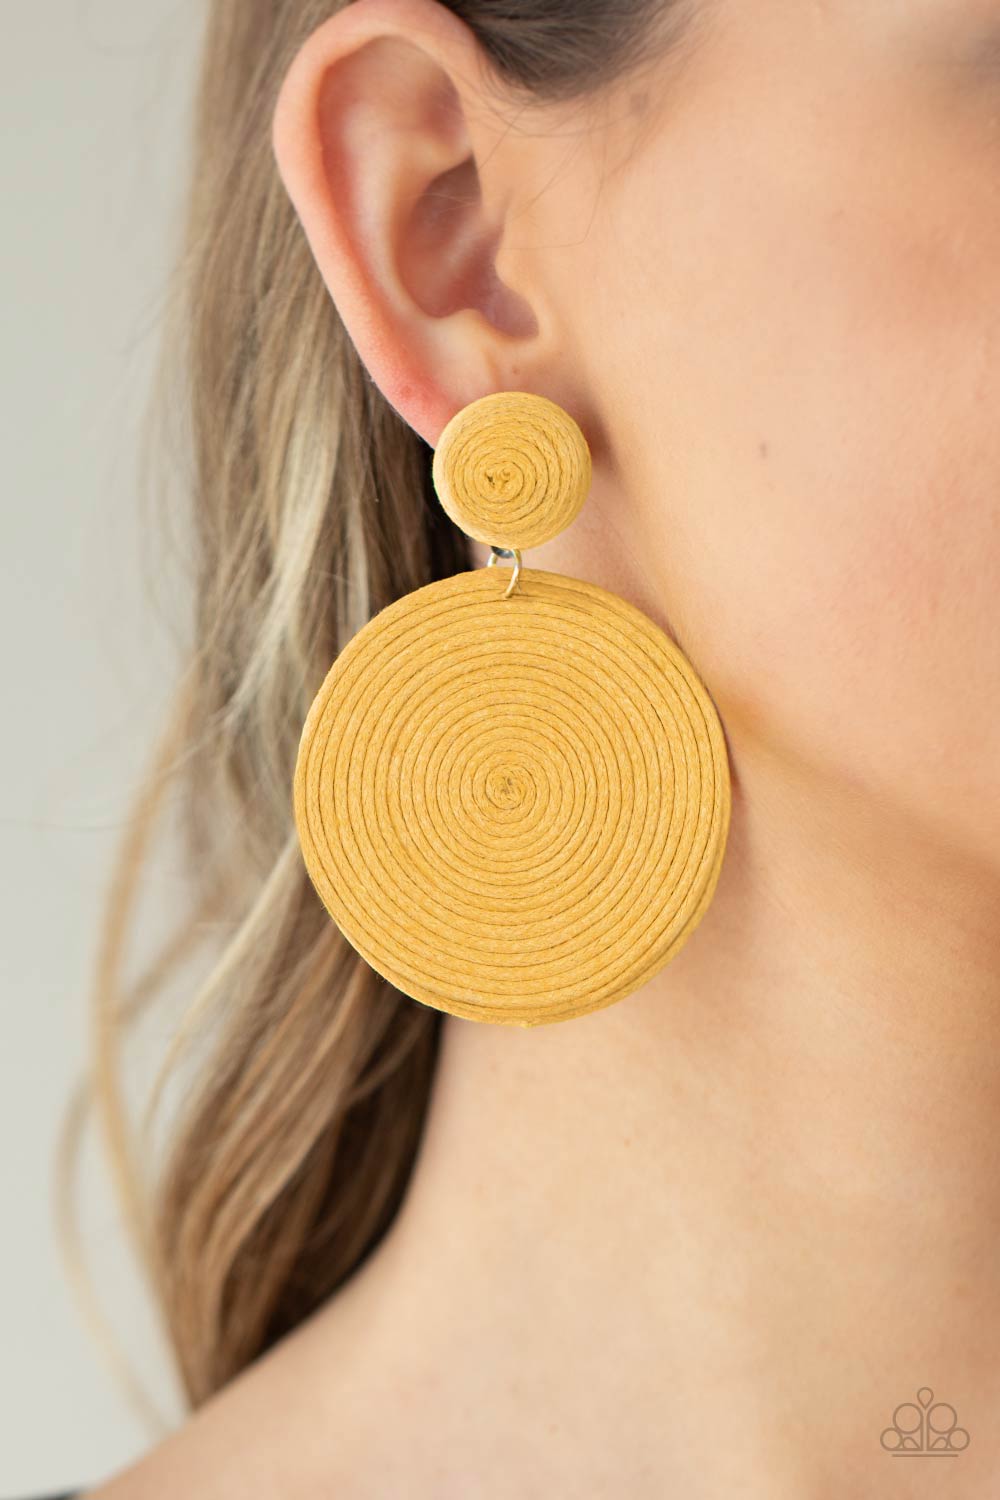 Circulate The Room Yellow Post Earring - Paparazzi Accessories  A generous disc of yellow thread spirals around and around for a dizzying finish as it connects to a yellow threaded button post. Earring attaches to a standard post fitting.  All Paparazzi Accessories are lead free and nickel free!  Sold as one pair of post earrings.